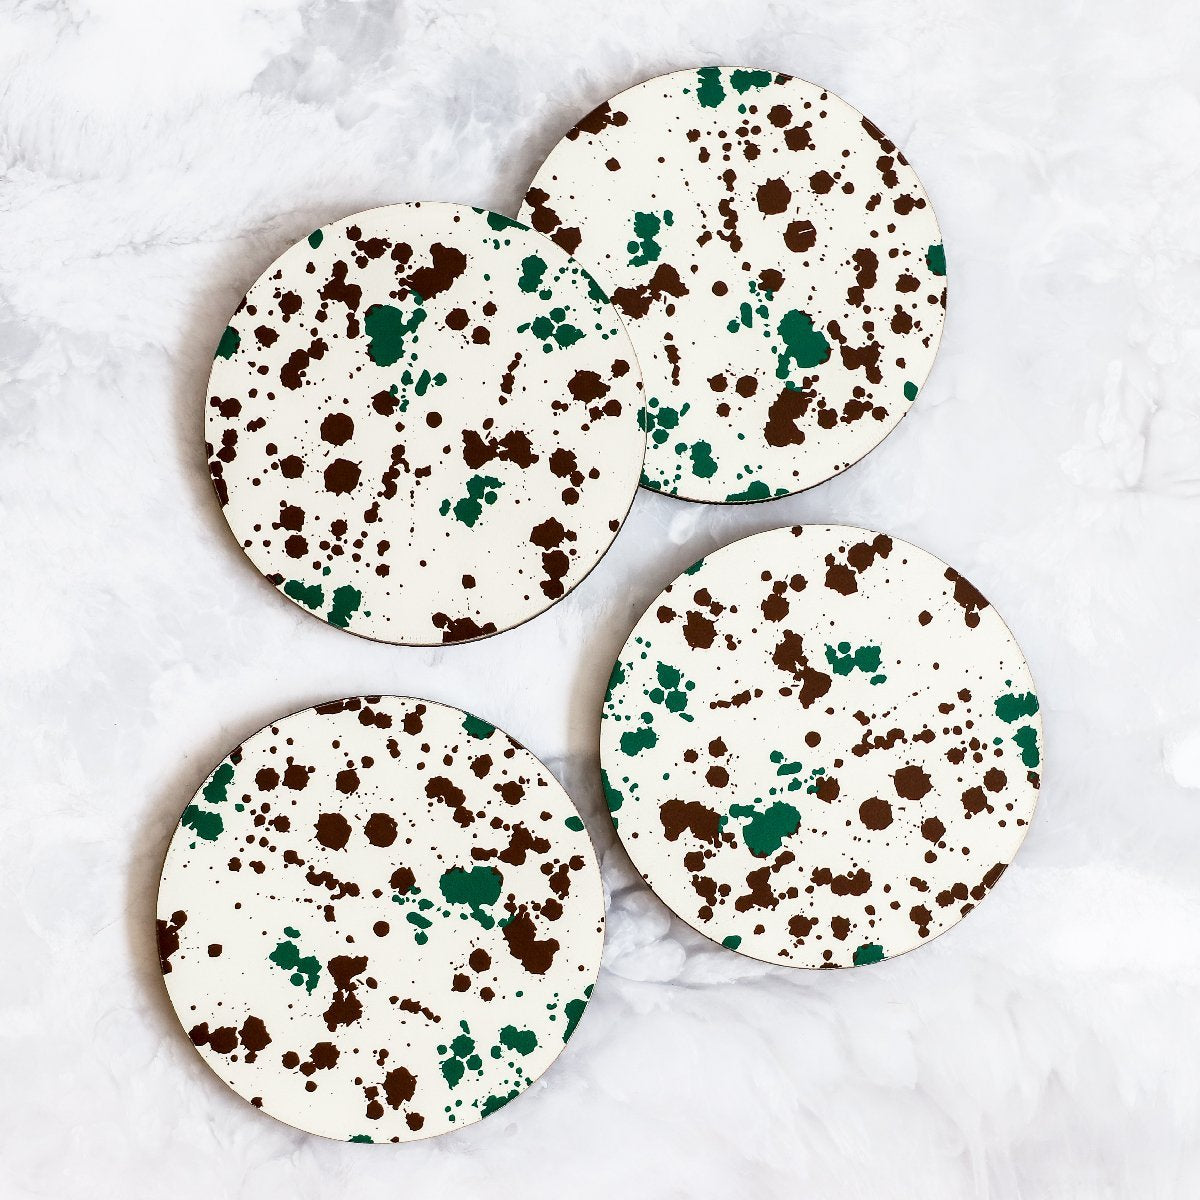 Printed Coasters with Splatter pattern in green and brown made of cork and wood by Tisch New York